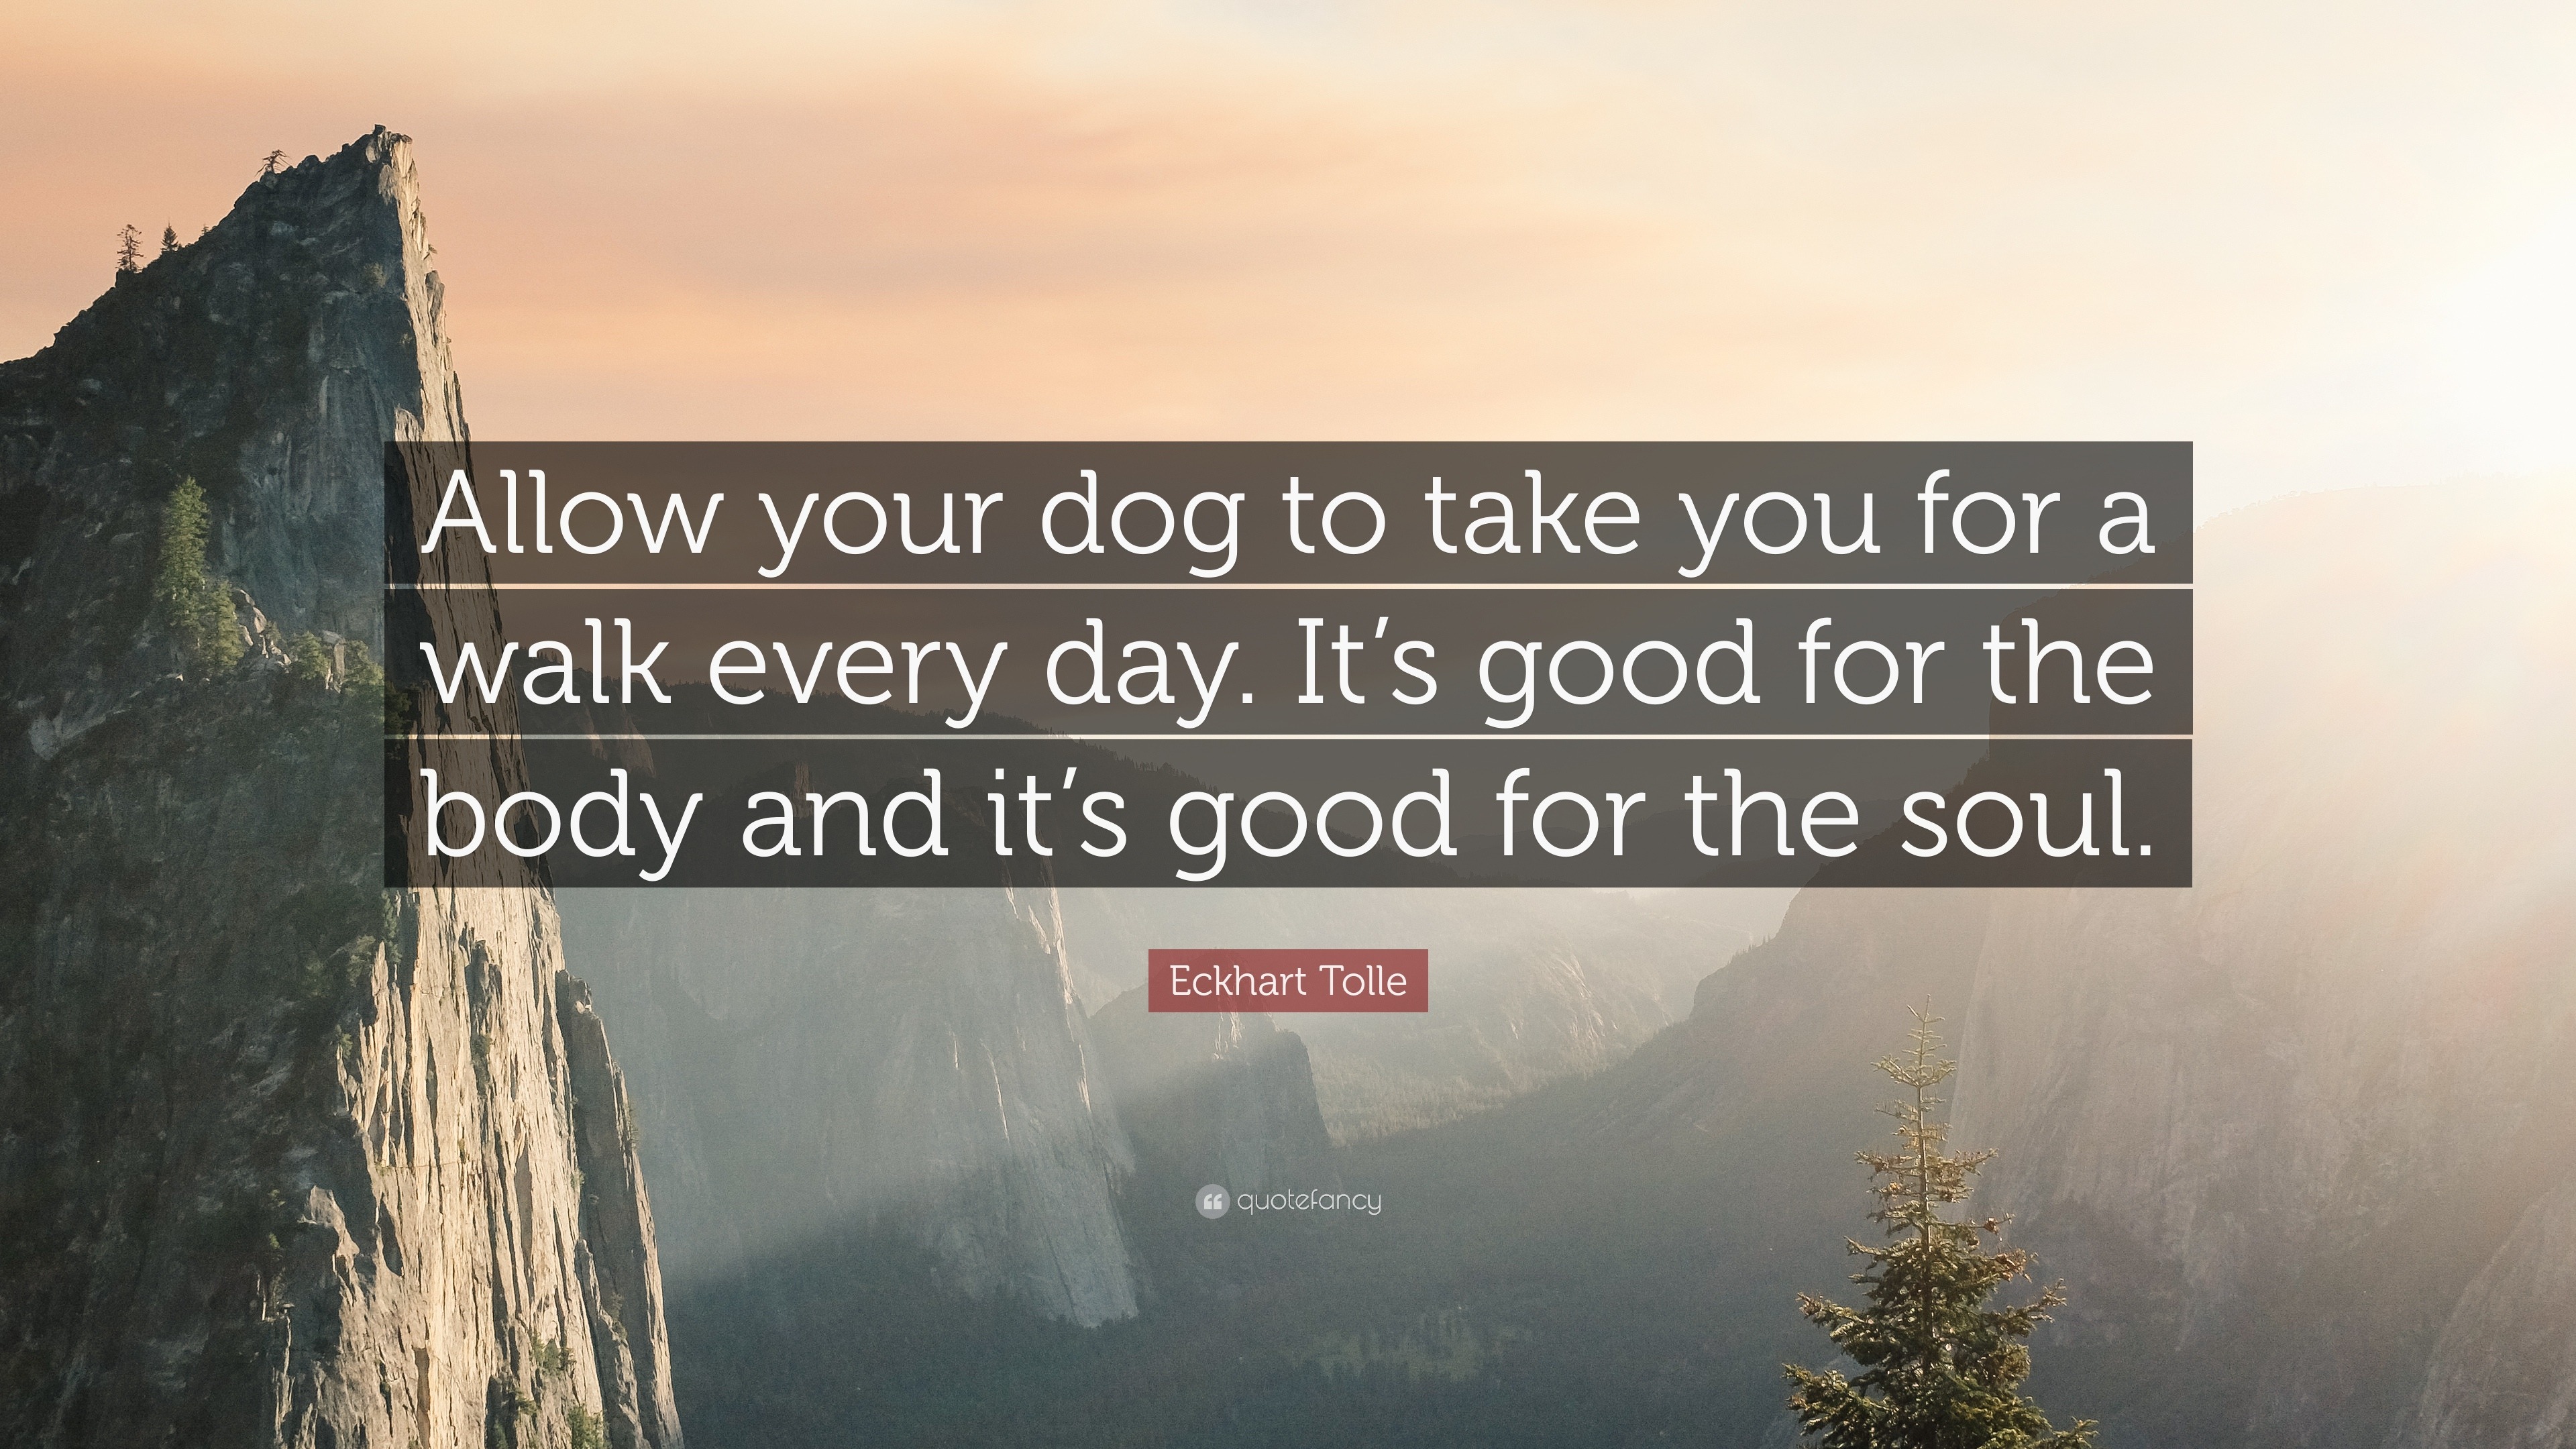 Eckhart Tolle Quote: “Allow Your Dog To Take You For A Walk Every Day. It's Good